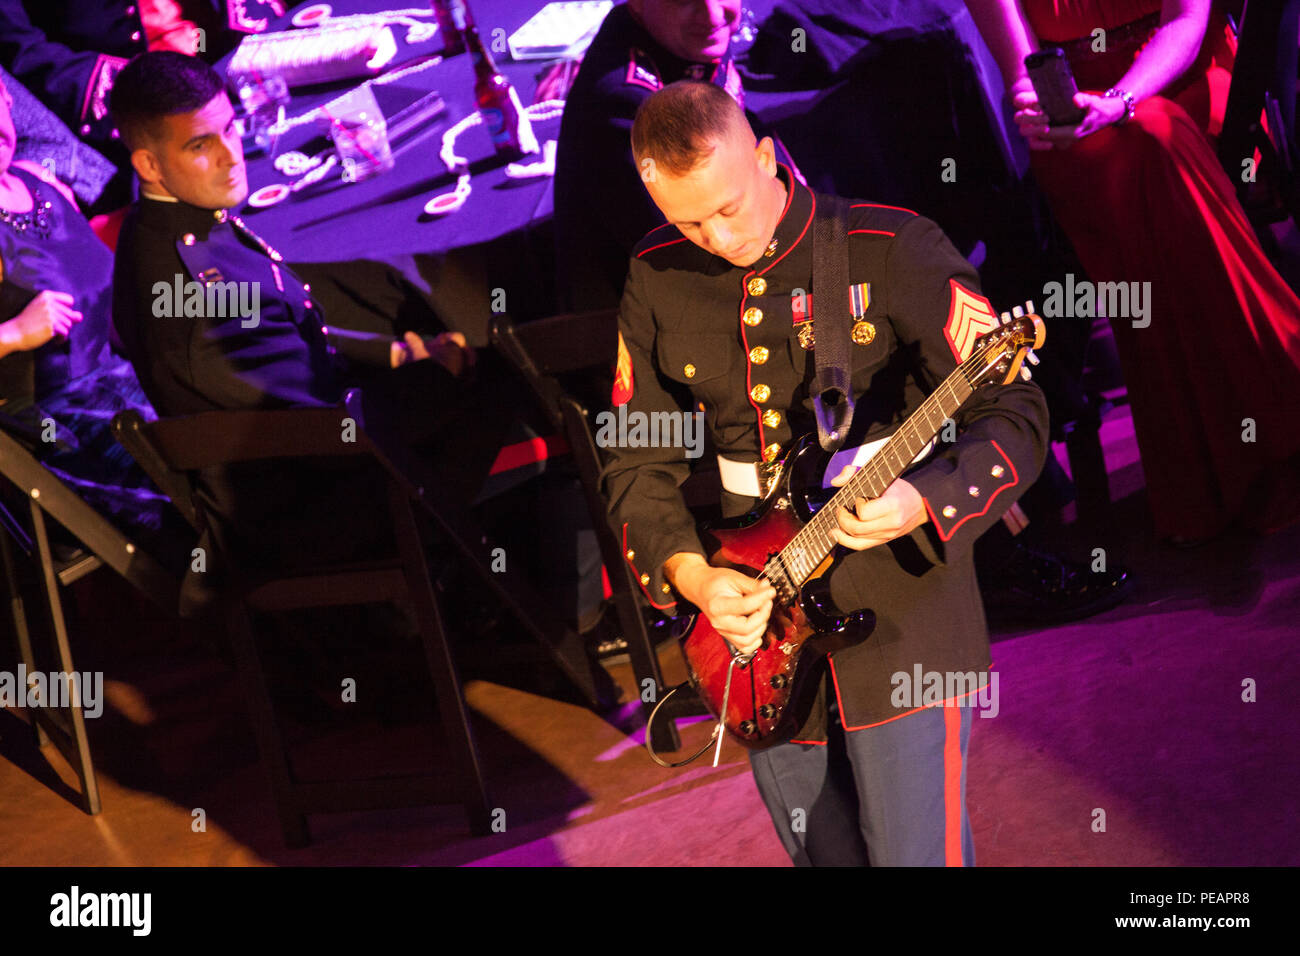 U.S. Marine Sgt. Samuel Gardner with Marine Corps Band New Orleans plays the electric guitar during their performance for the celebration of the 240th Marine Corps Birthday Ball at Mardi Gras World, New Orleans, La., Nov. 21, 2015. This year’s celebration honors those past, present, and future Marines throughout history and marks the 240th Marine Corps Birthday since its founding on Nov. 10, 1775. (U.S. Marine Corps photo by Kimberly Aguirre/Released) Stock Photo